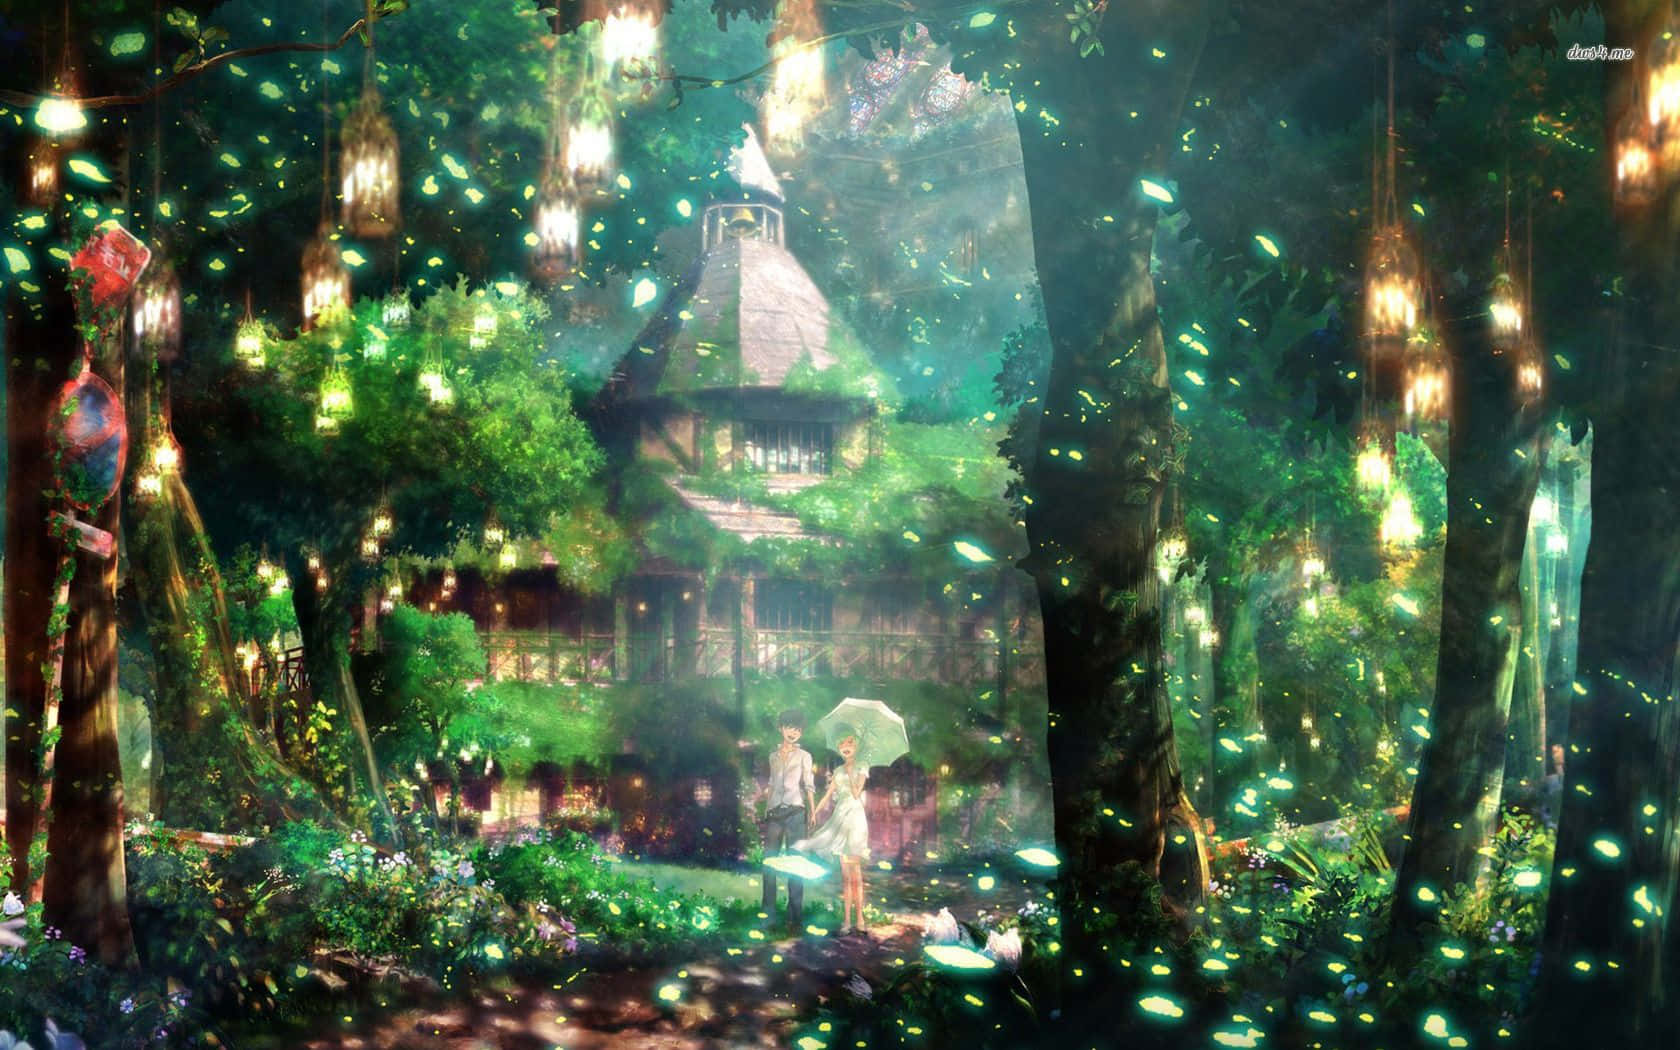 Explore the lush, mysterious Anime Forest and uncover its secrets